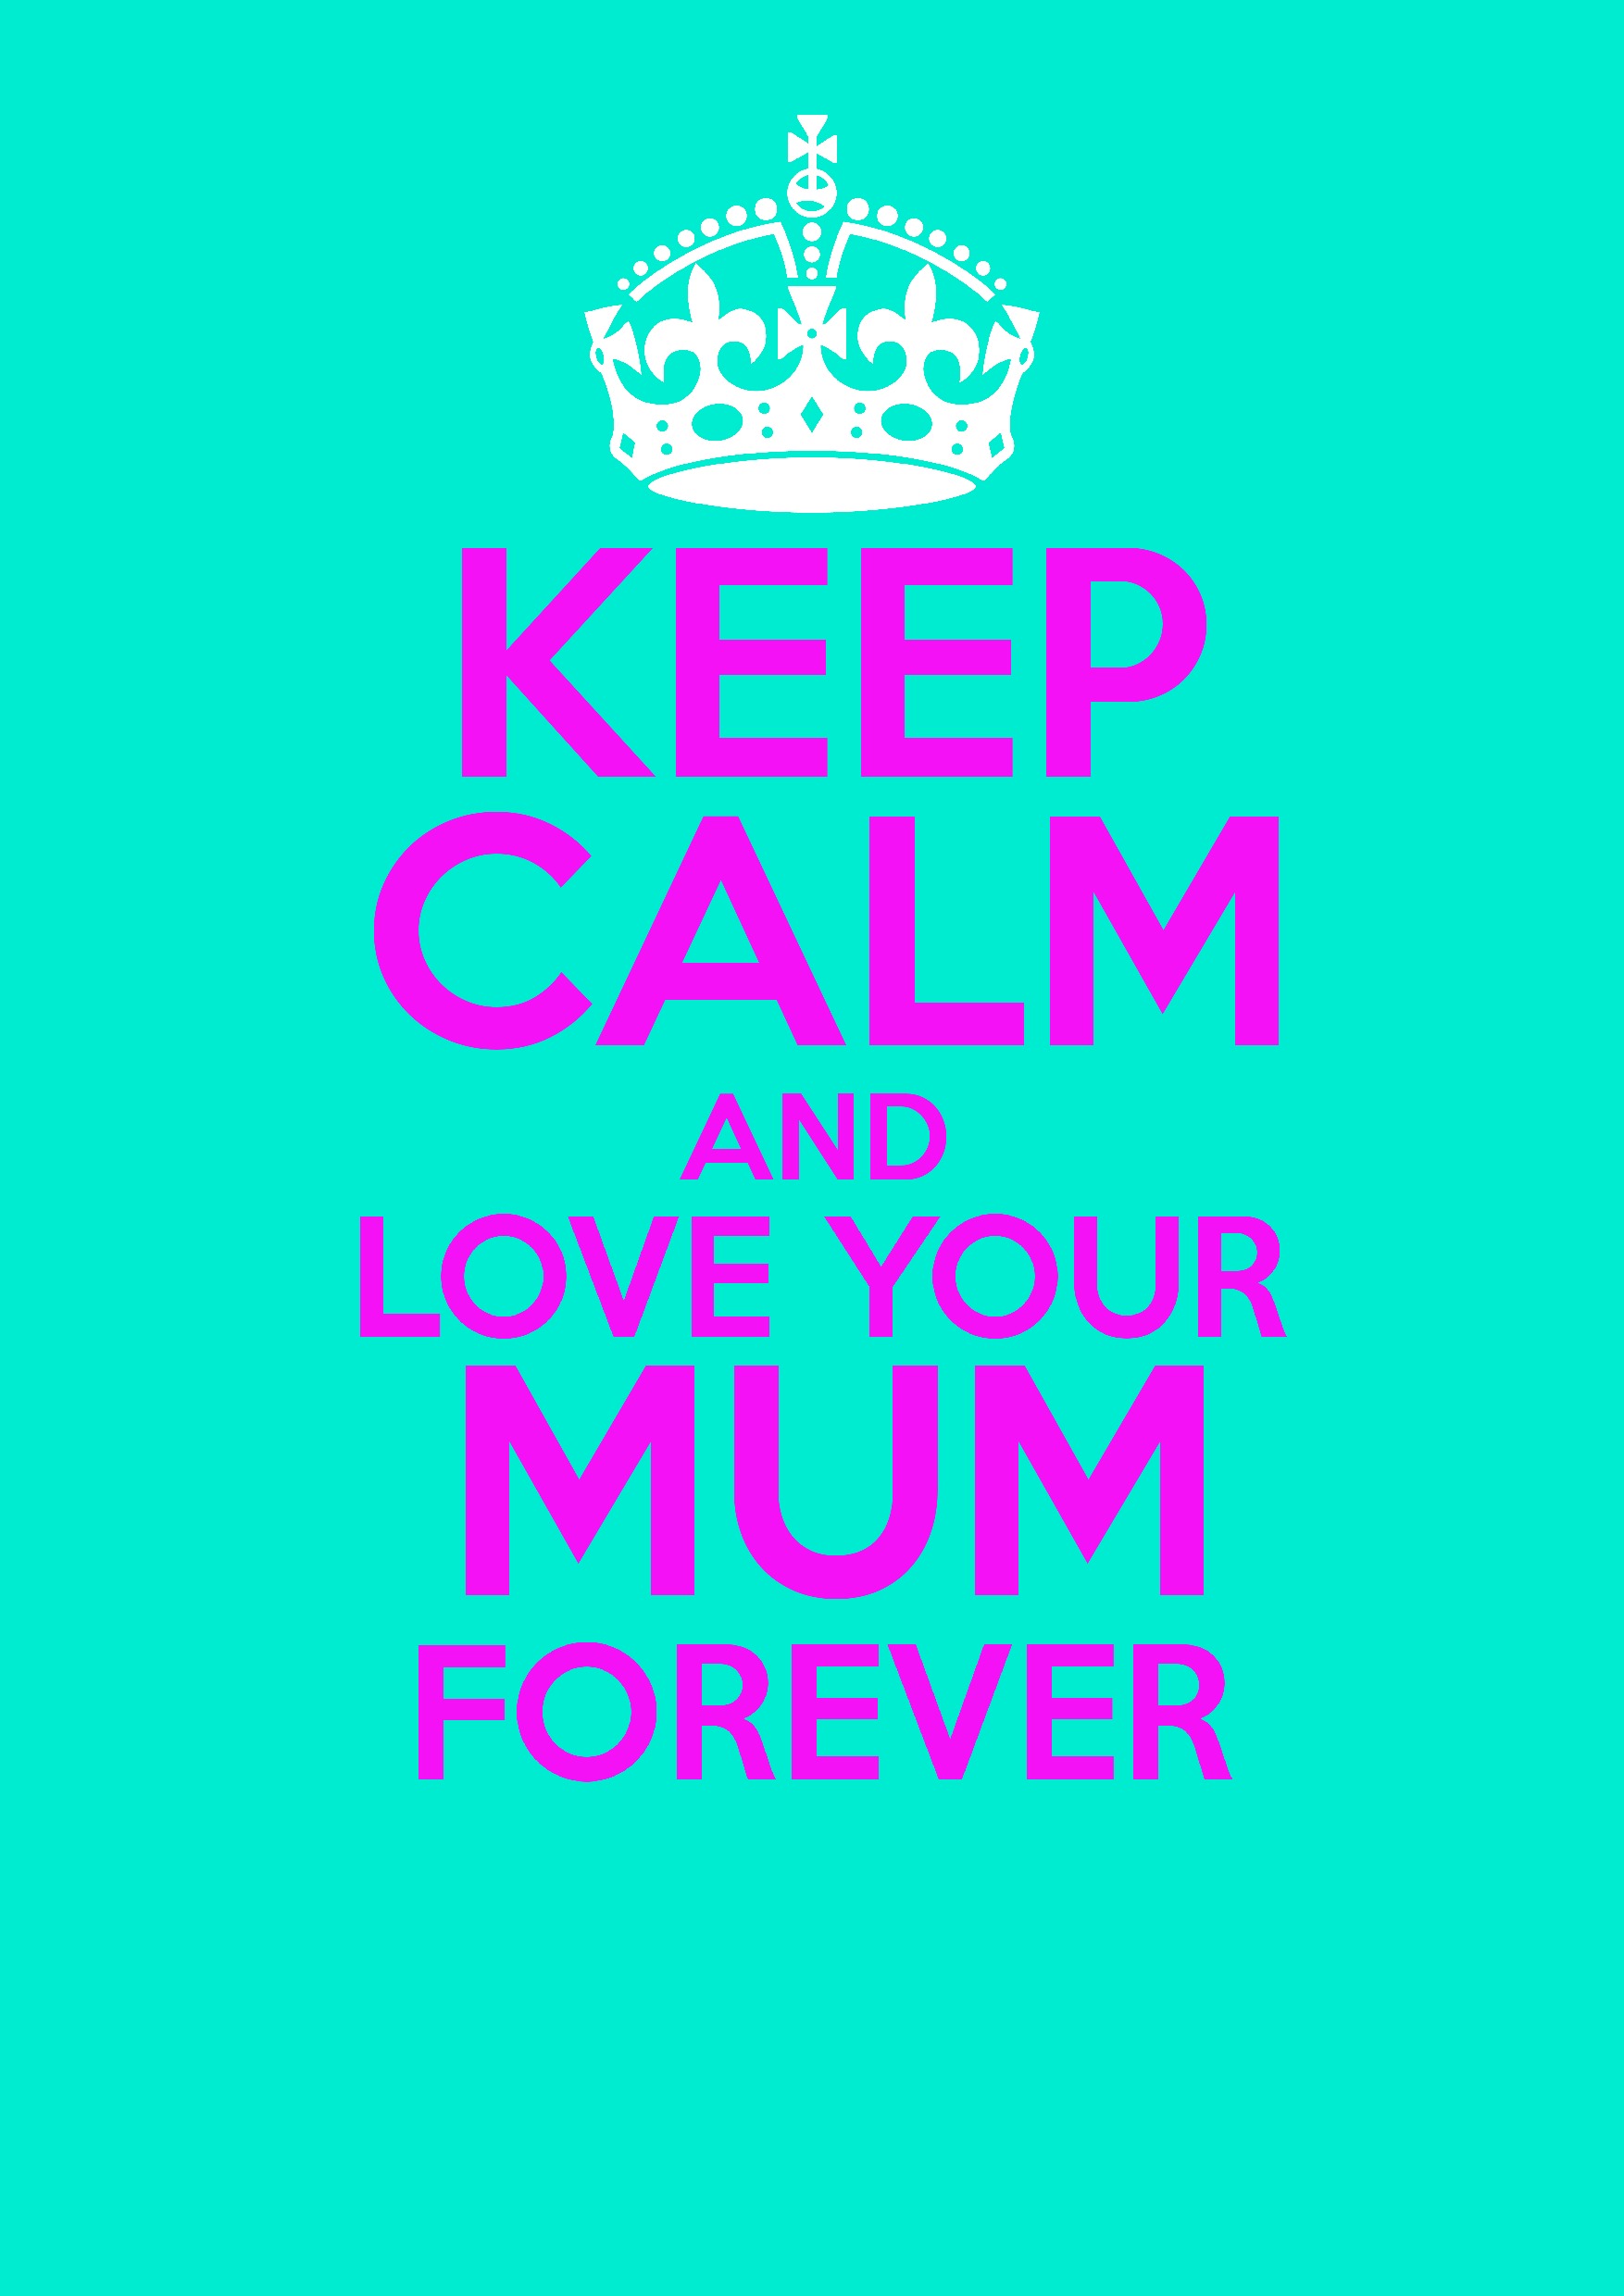 keep calm backgrounds for girls